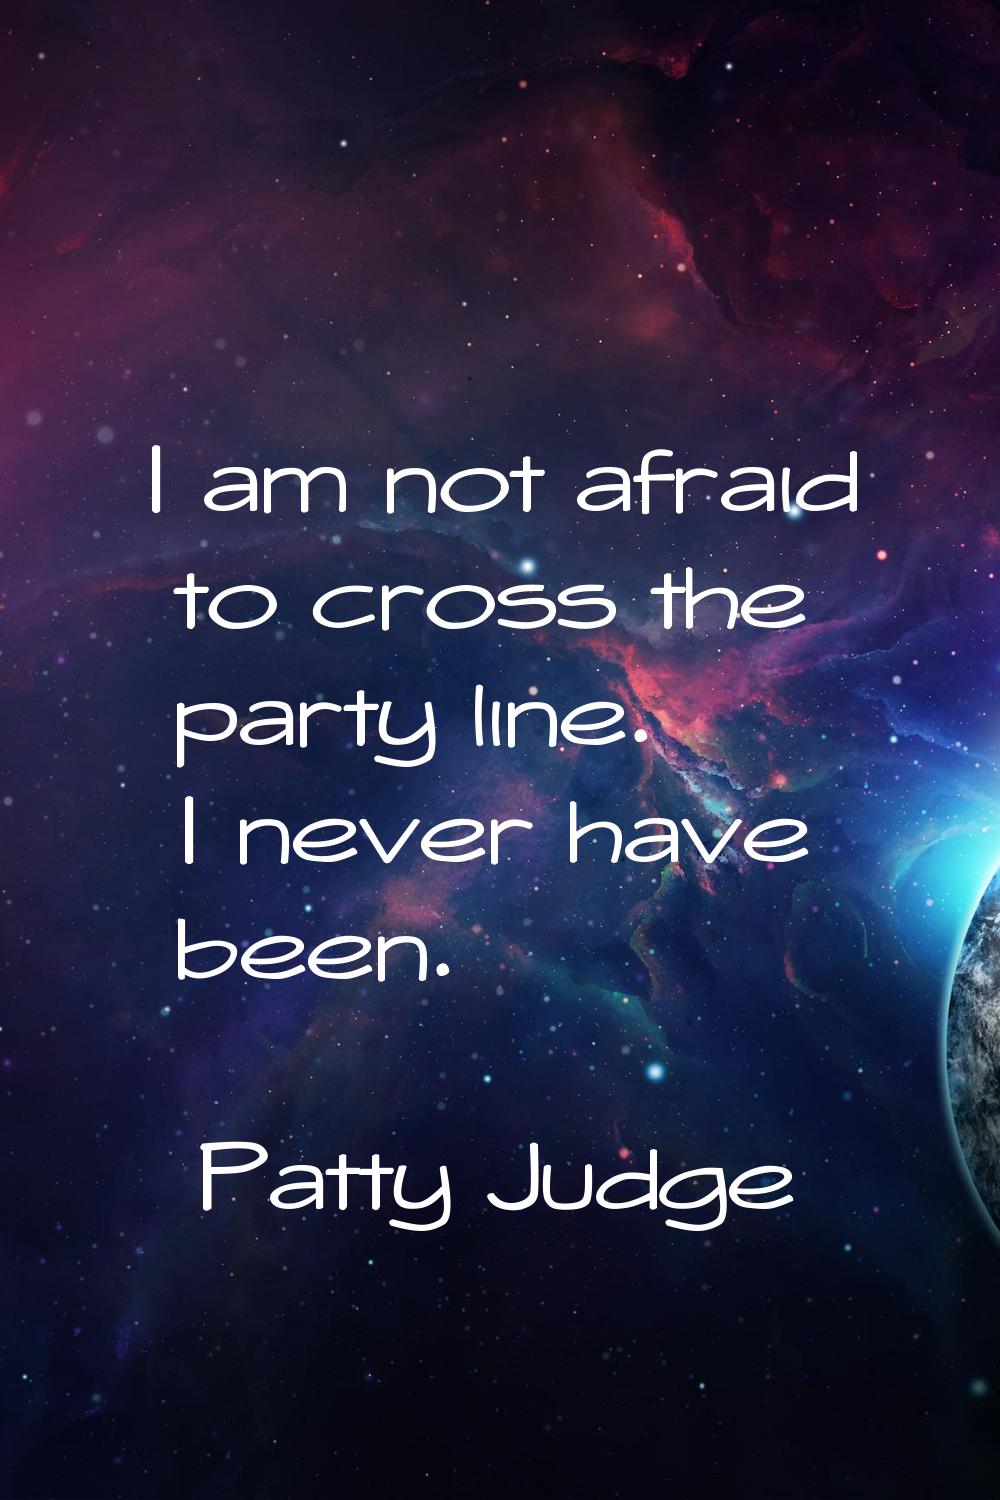 I am not afraid to cross the party line. I never have been.